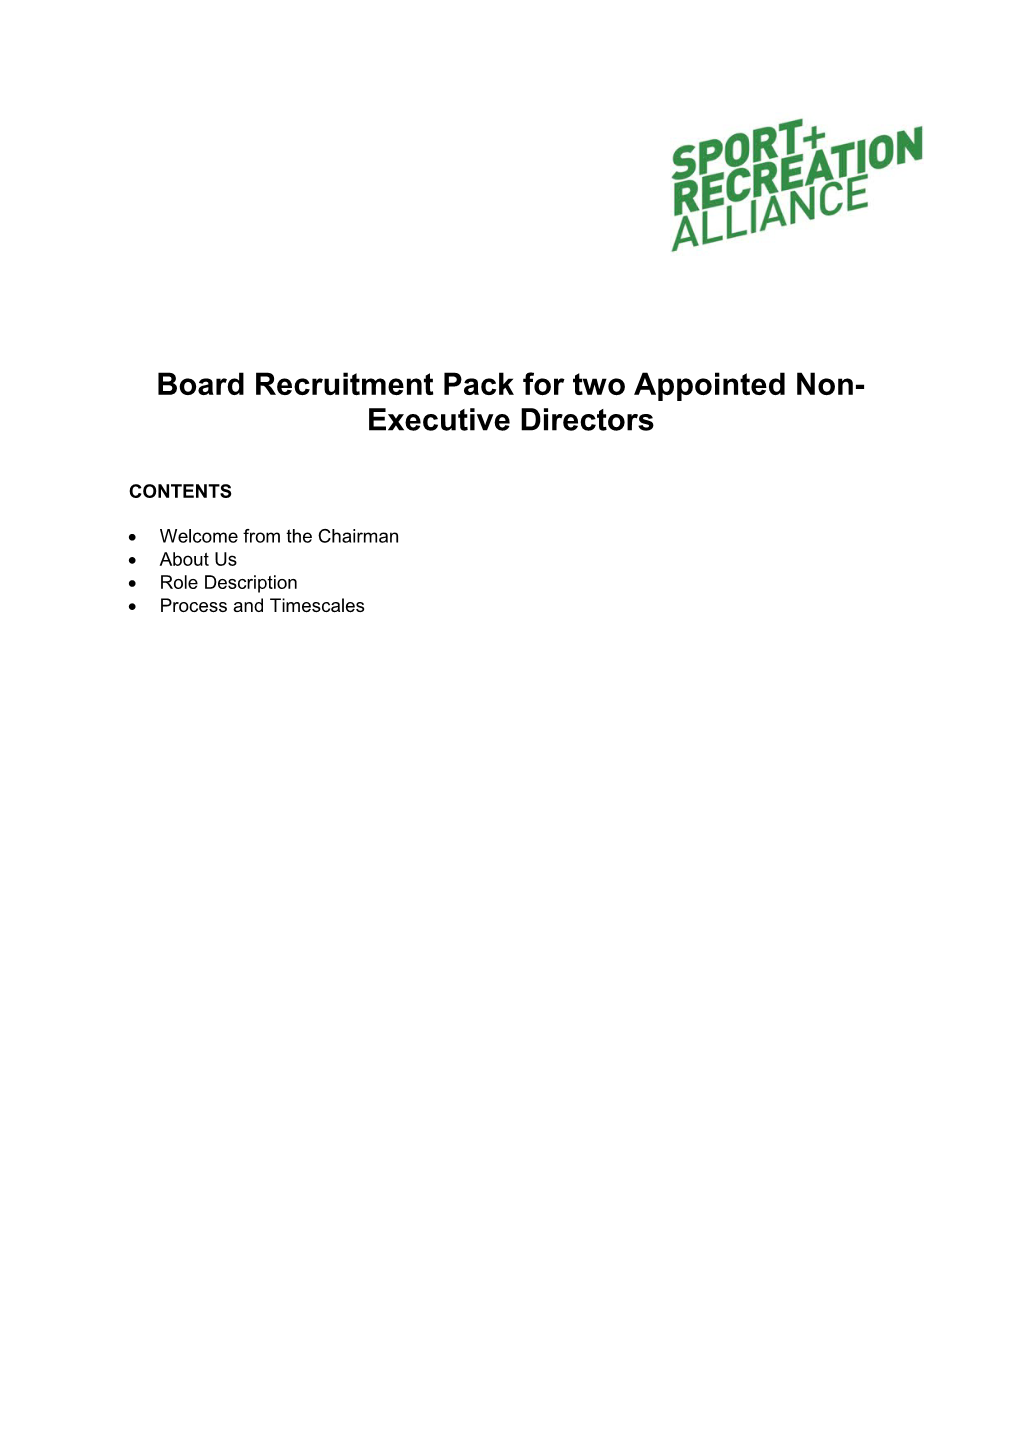 Board Recruitment Pack for Two Appointed Non-Executive Directors